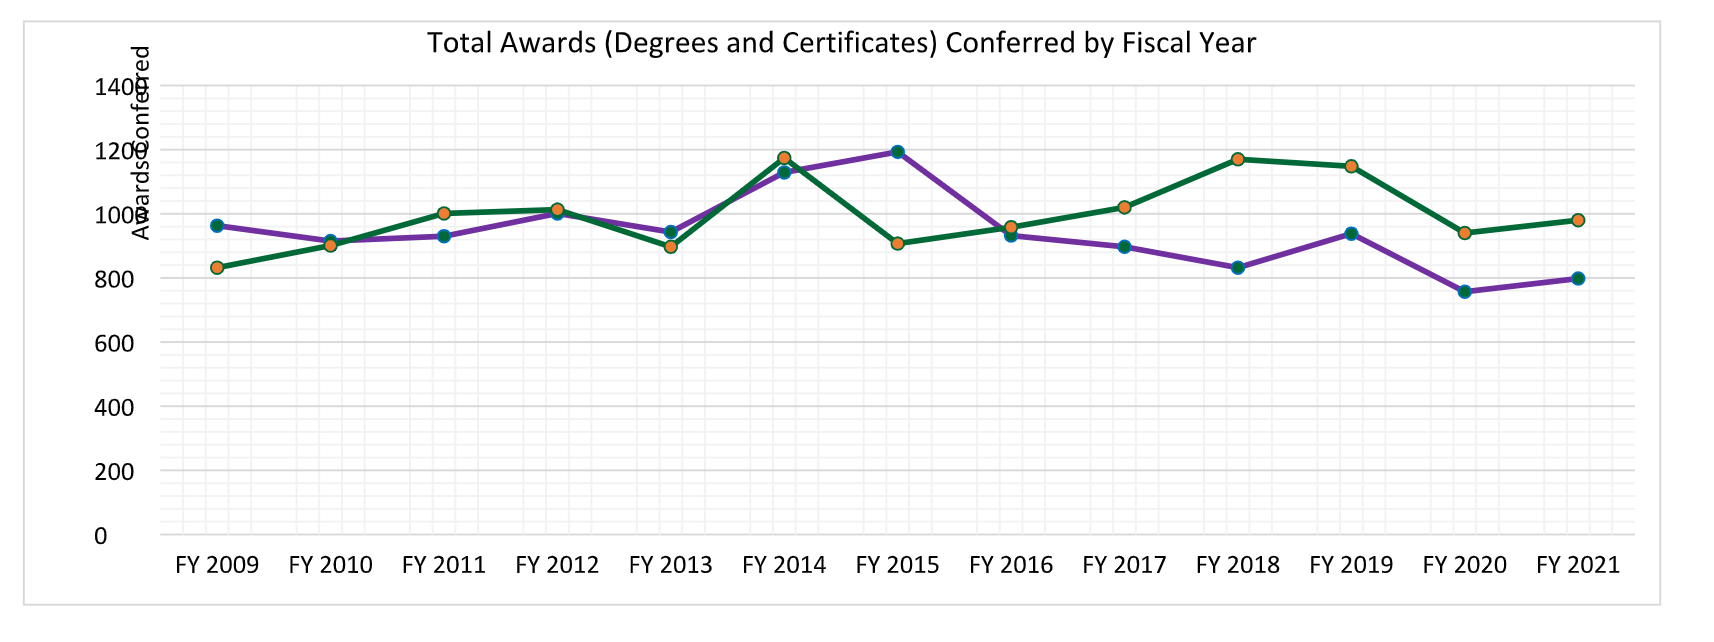 Total awards conferred by fiscal year graph